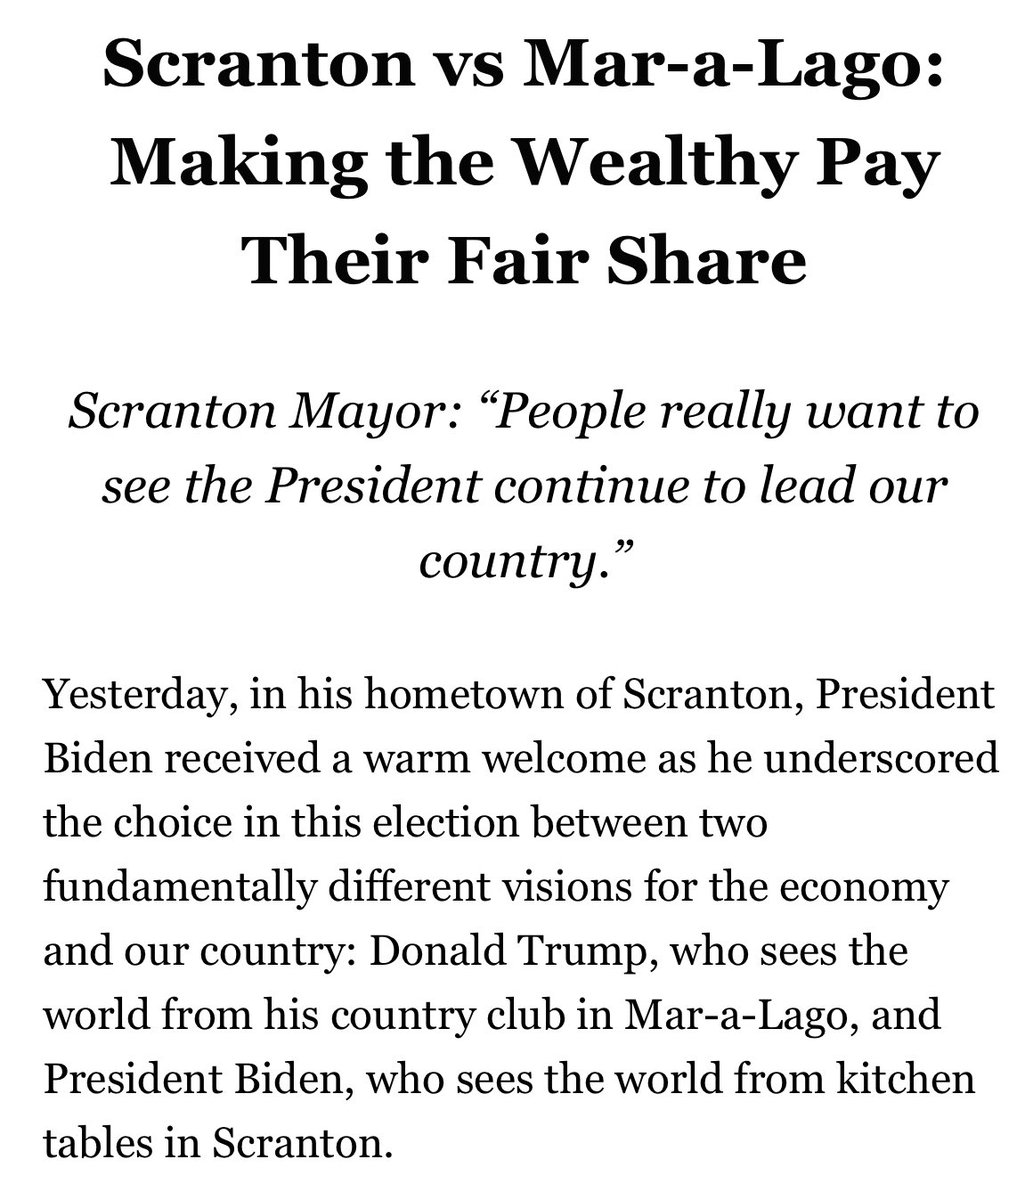 It is amusing that Joe Biden is trying to frame the campaign as “Scranton v Mar a Lago” as if he doesn’t live a billionaire’s lifestyle in a bespoke mansion he built on a lakefront estate in chateau country in one of the ritiziest parts of the country.